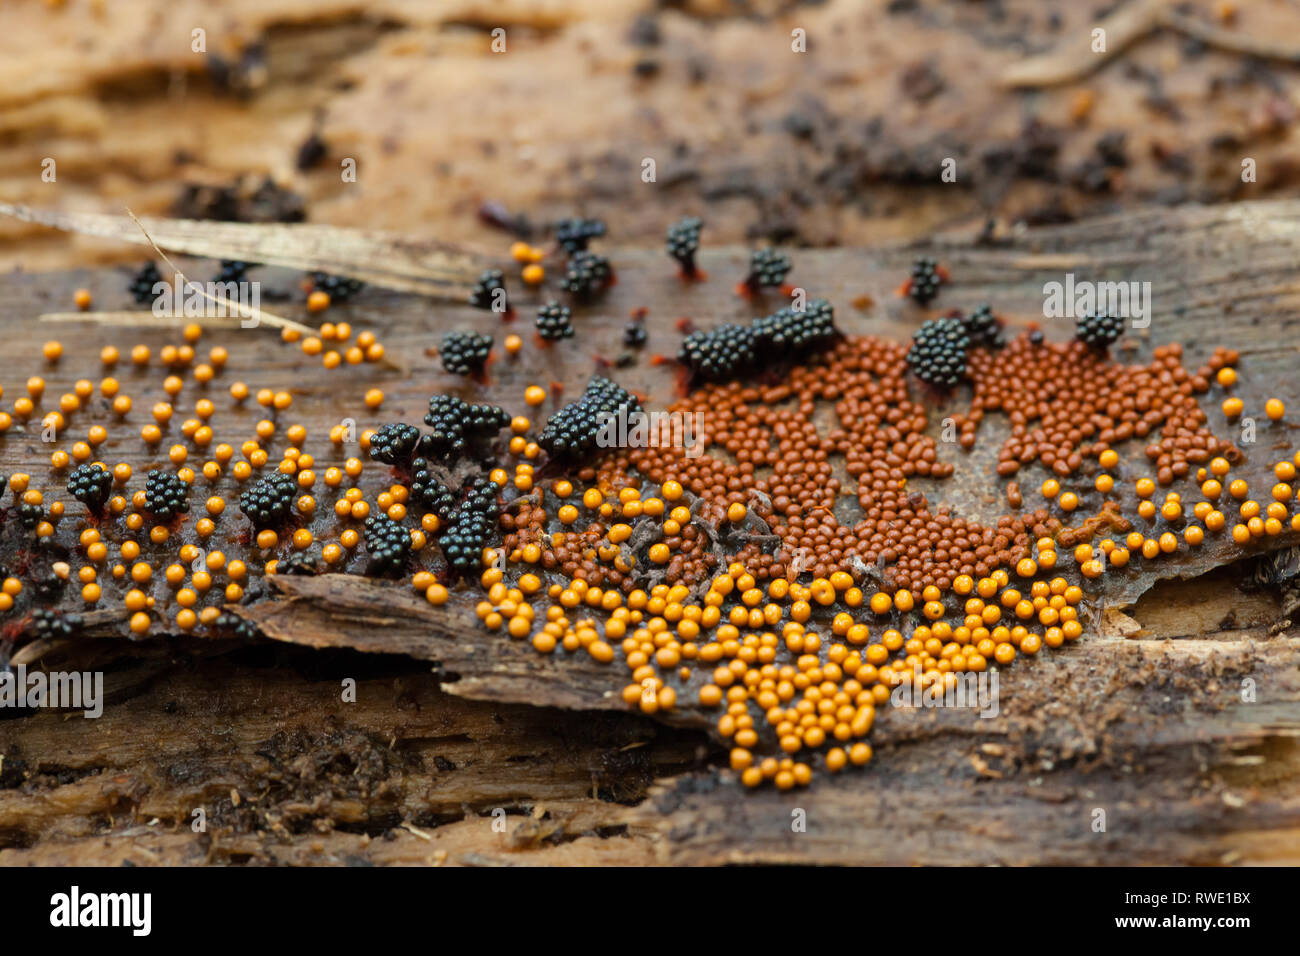 Different species of slime mold on rotten tree trunk Stock Photo